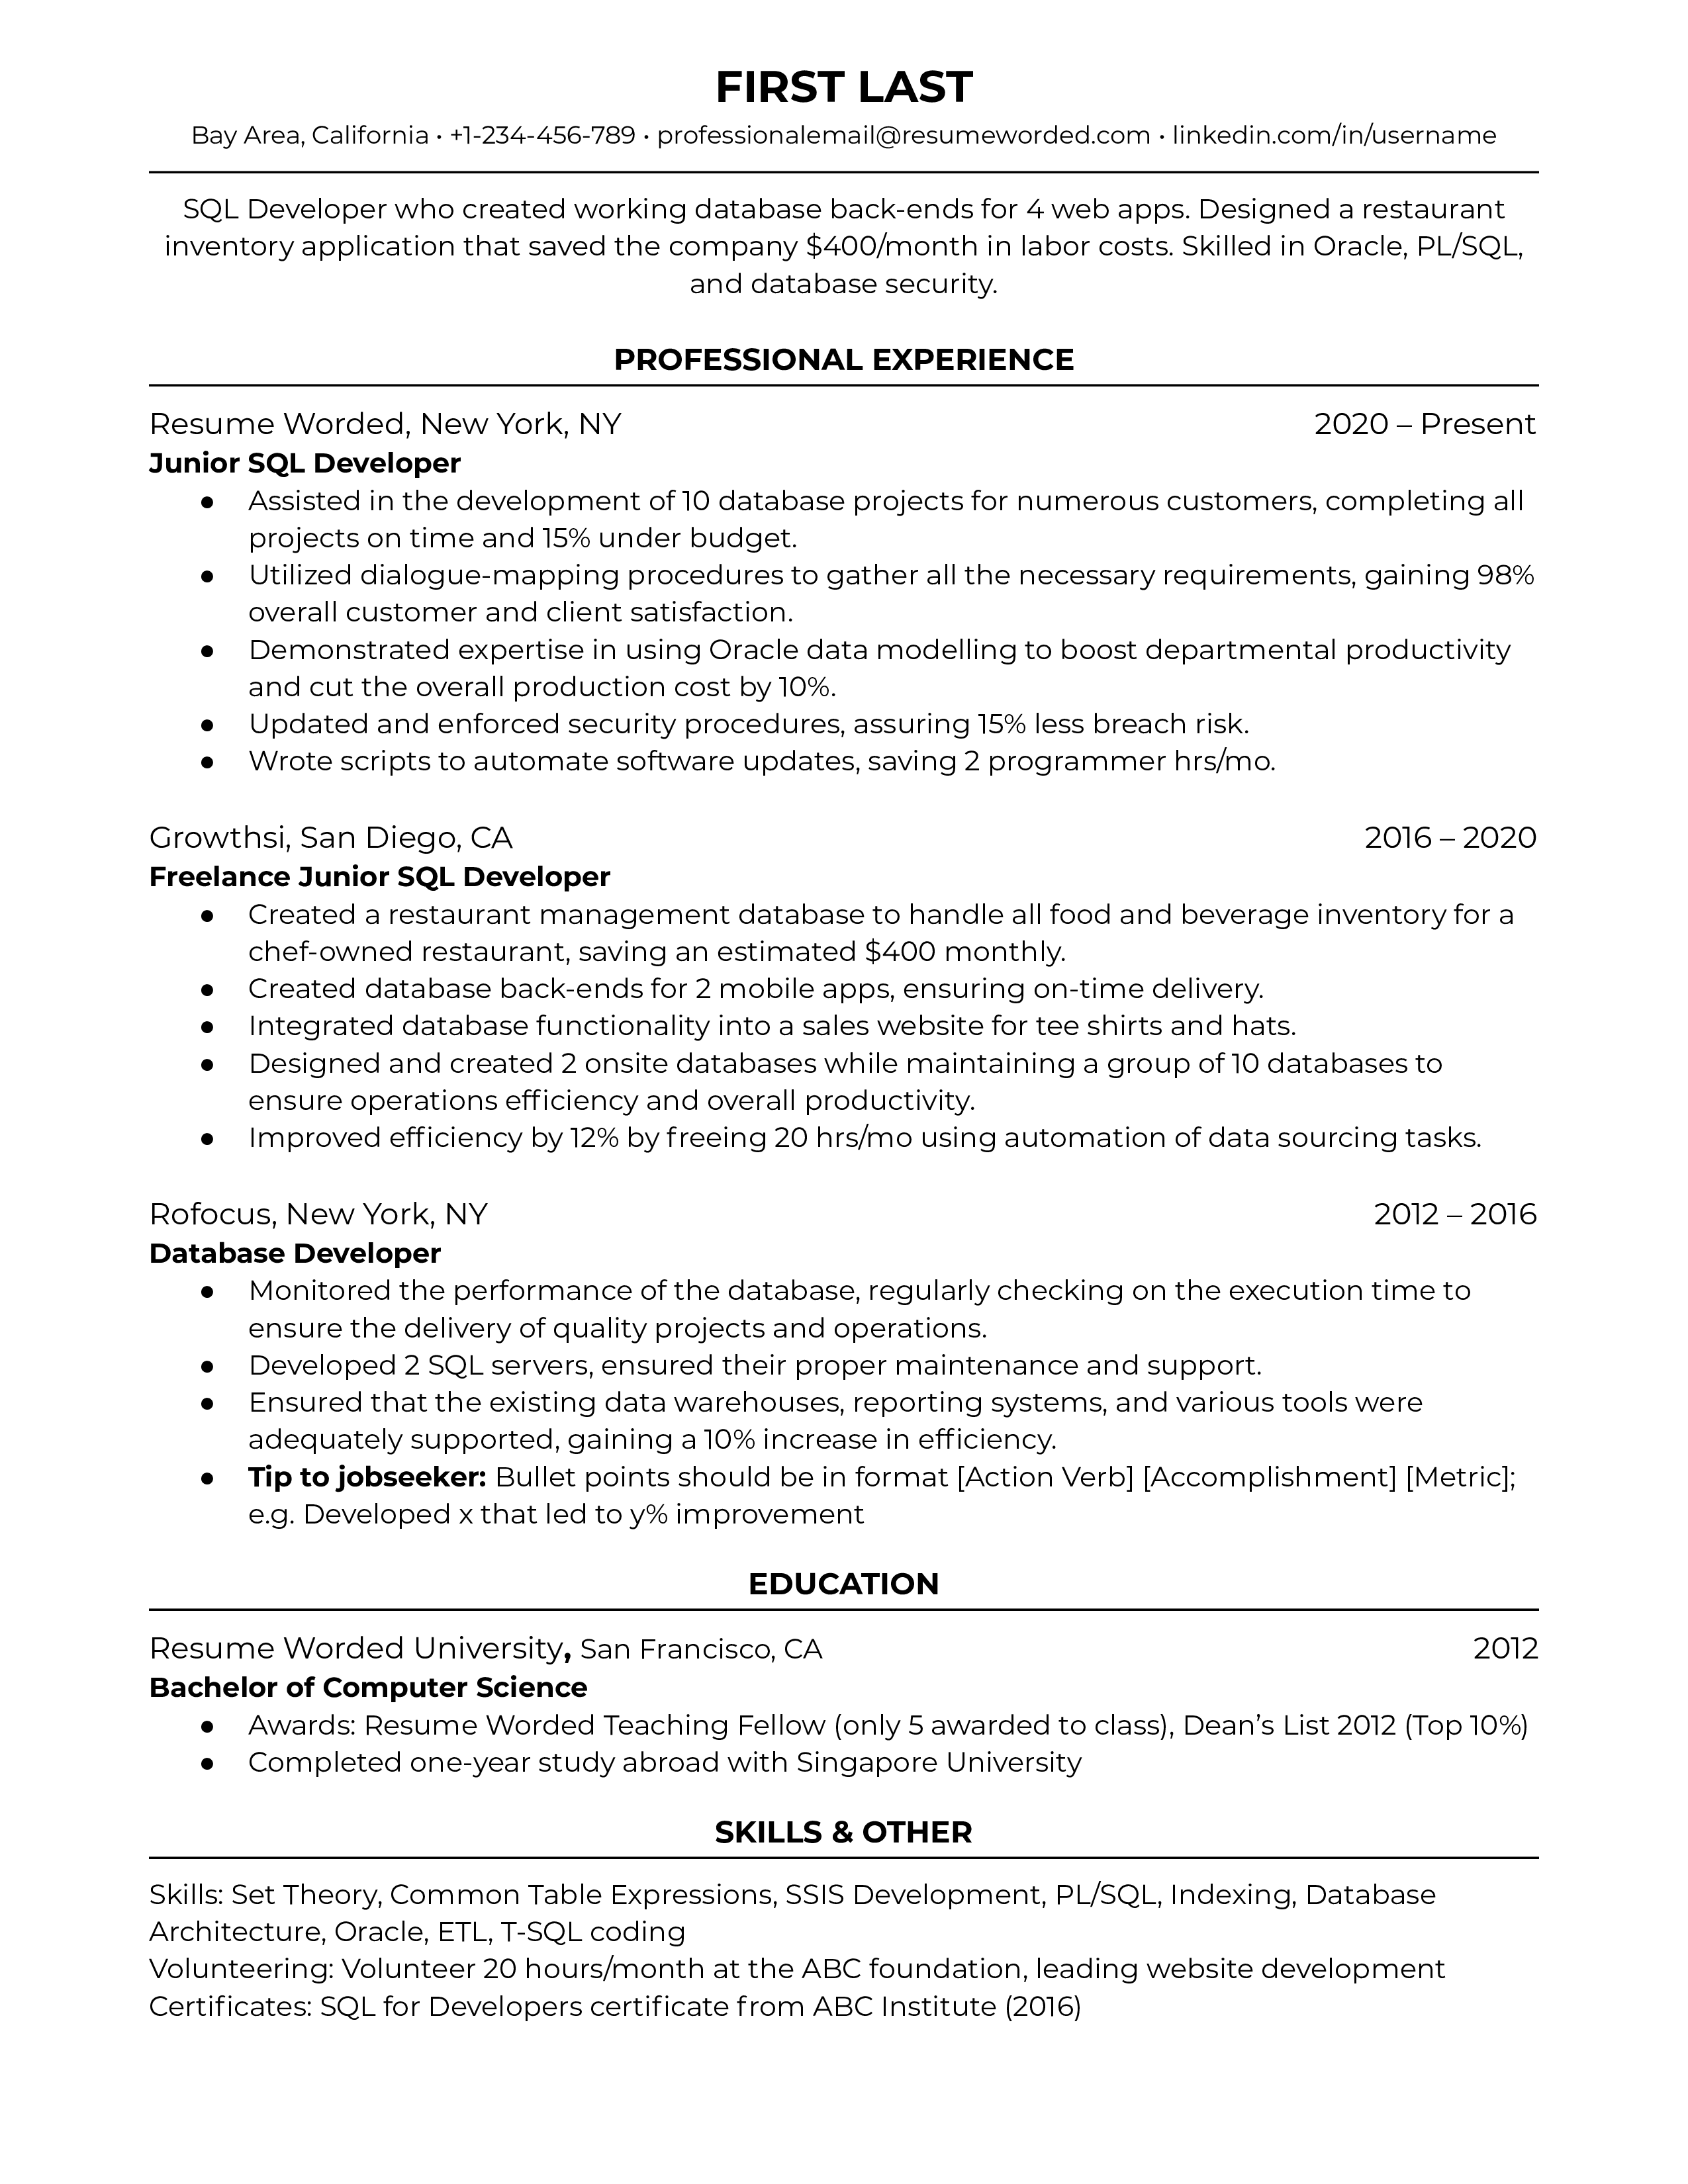 This Junior SQL Developer resume template highlights one's experience developing an application that helped the client with their business.